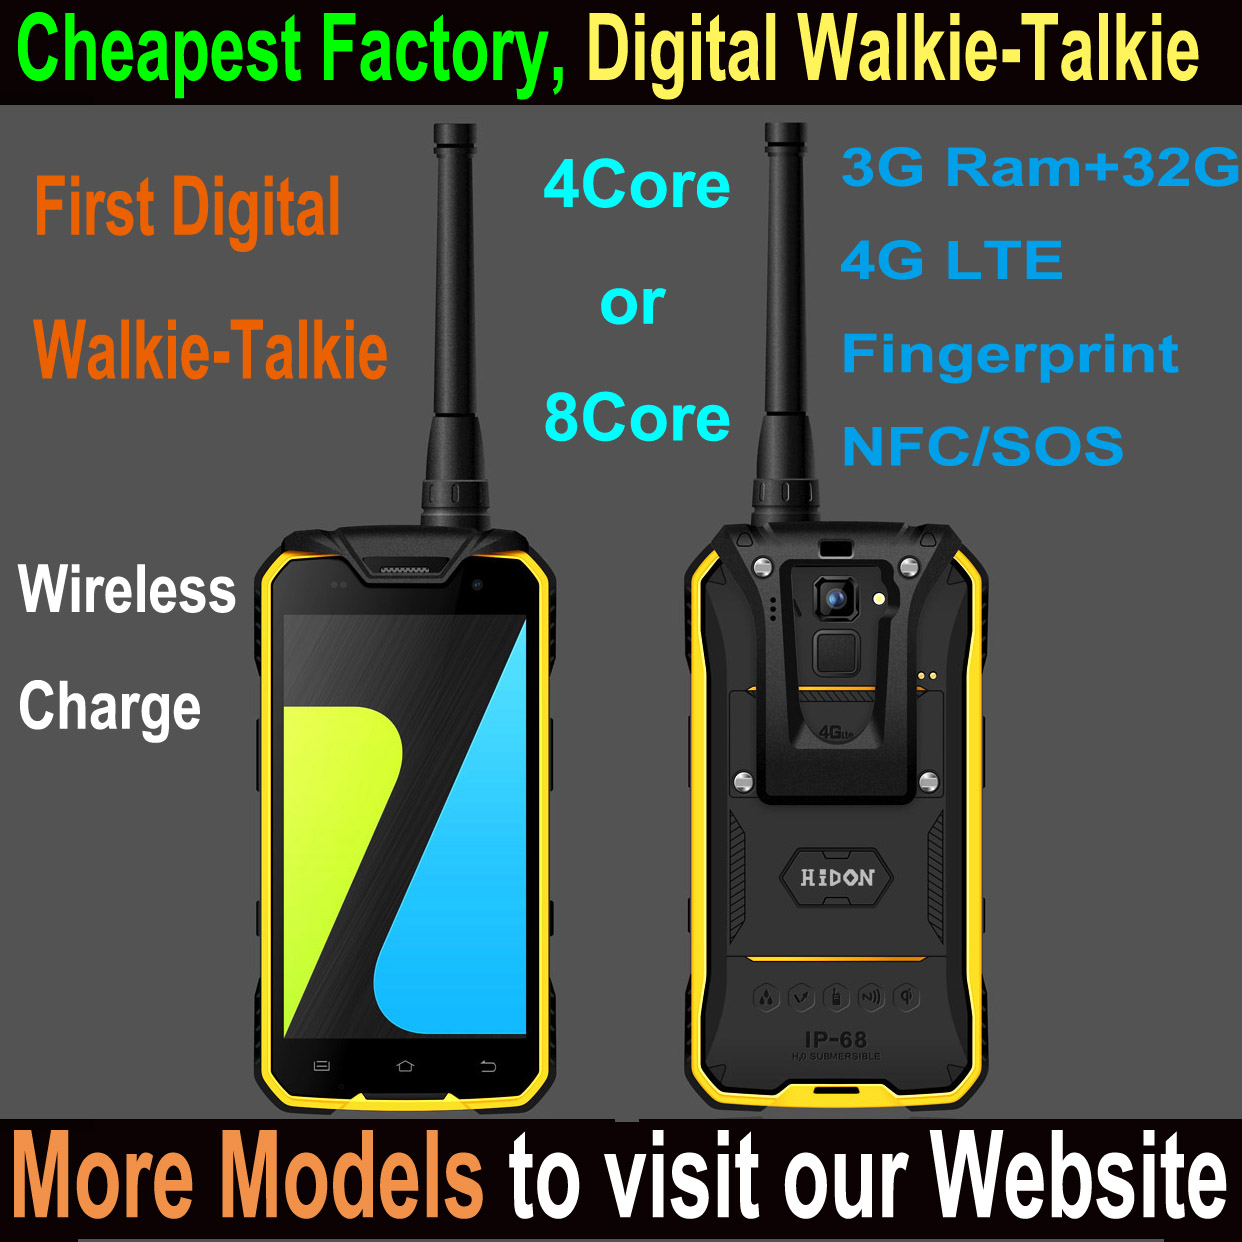 Highton 4.7" Quad-core IP68 wireless charge Rugged Smart phone , 4G Industrial smart phone with NFC and digital Walkie-Talkie